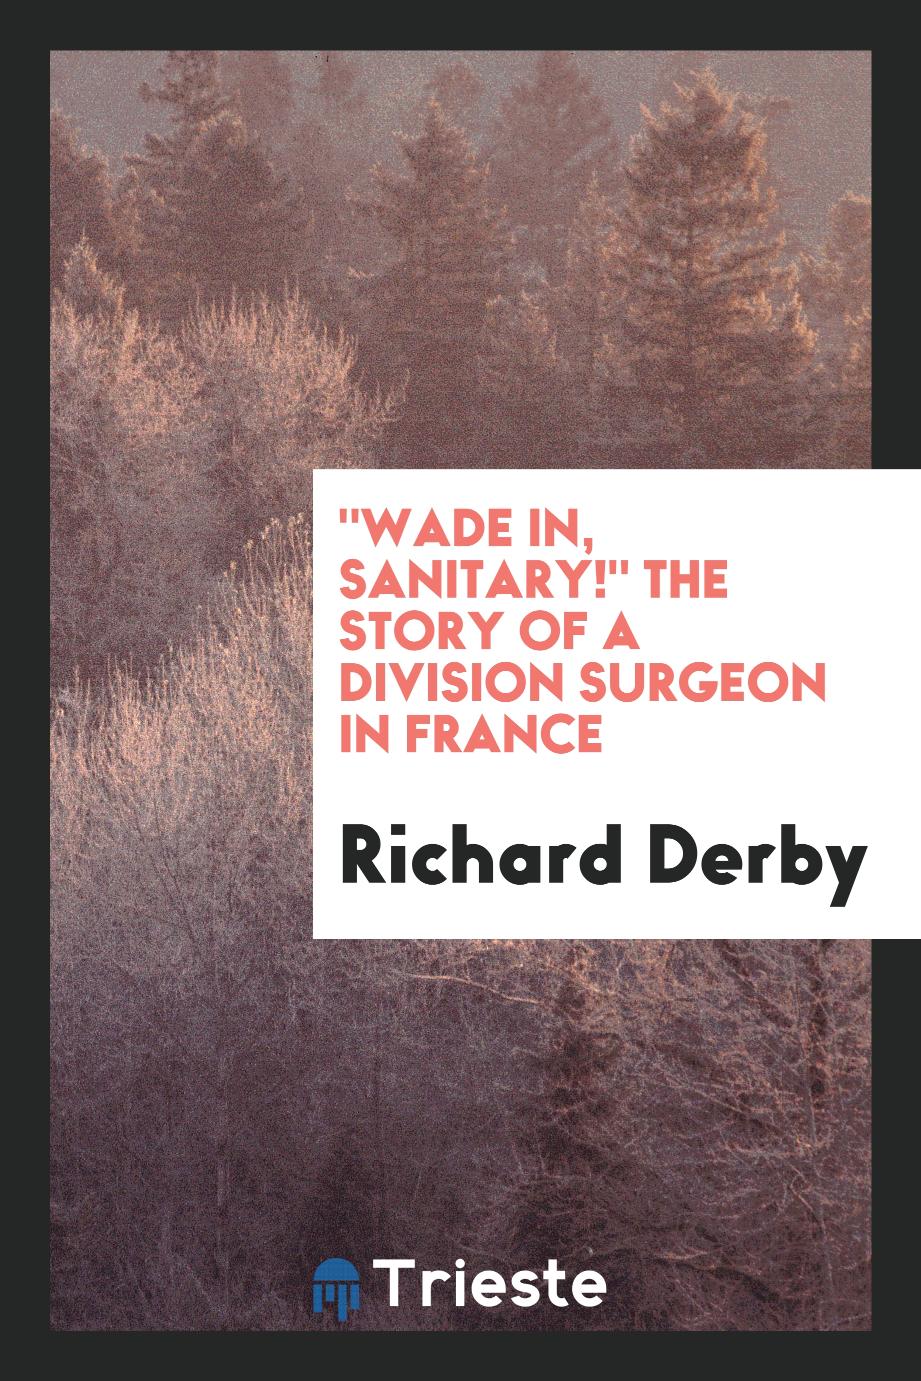 "Wade in, sanitary!" The story of a division surgeon in France